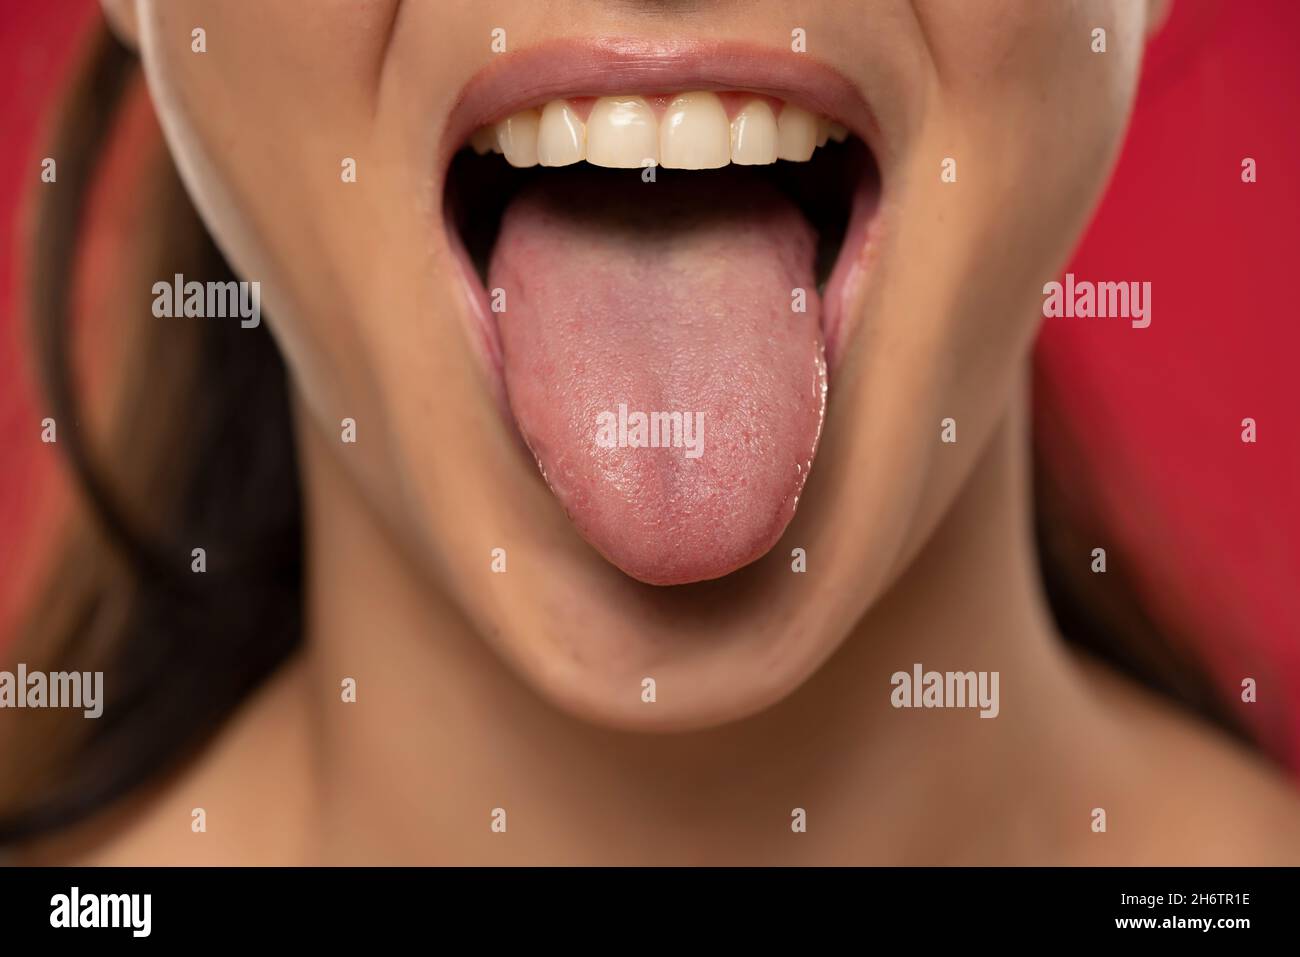 Split in middle of tongue